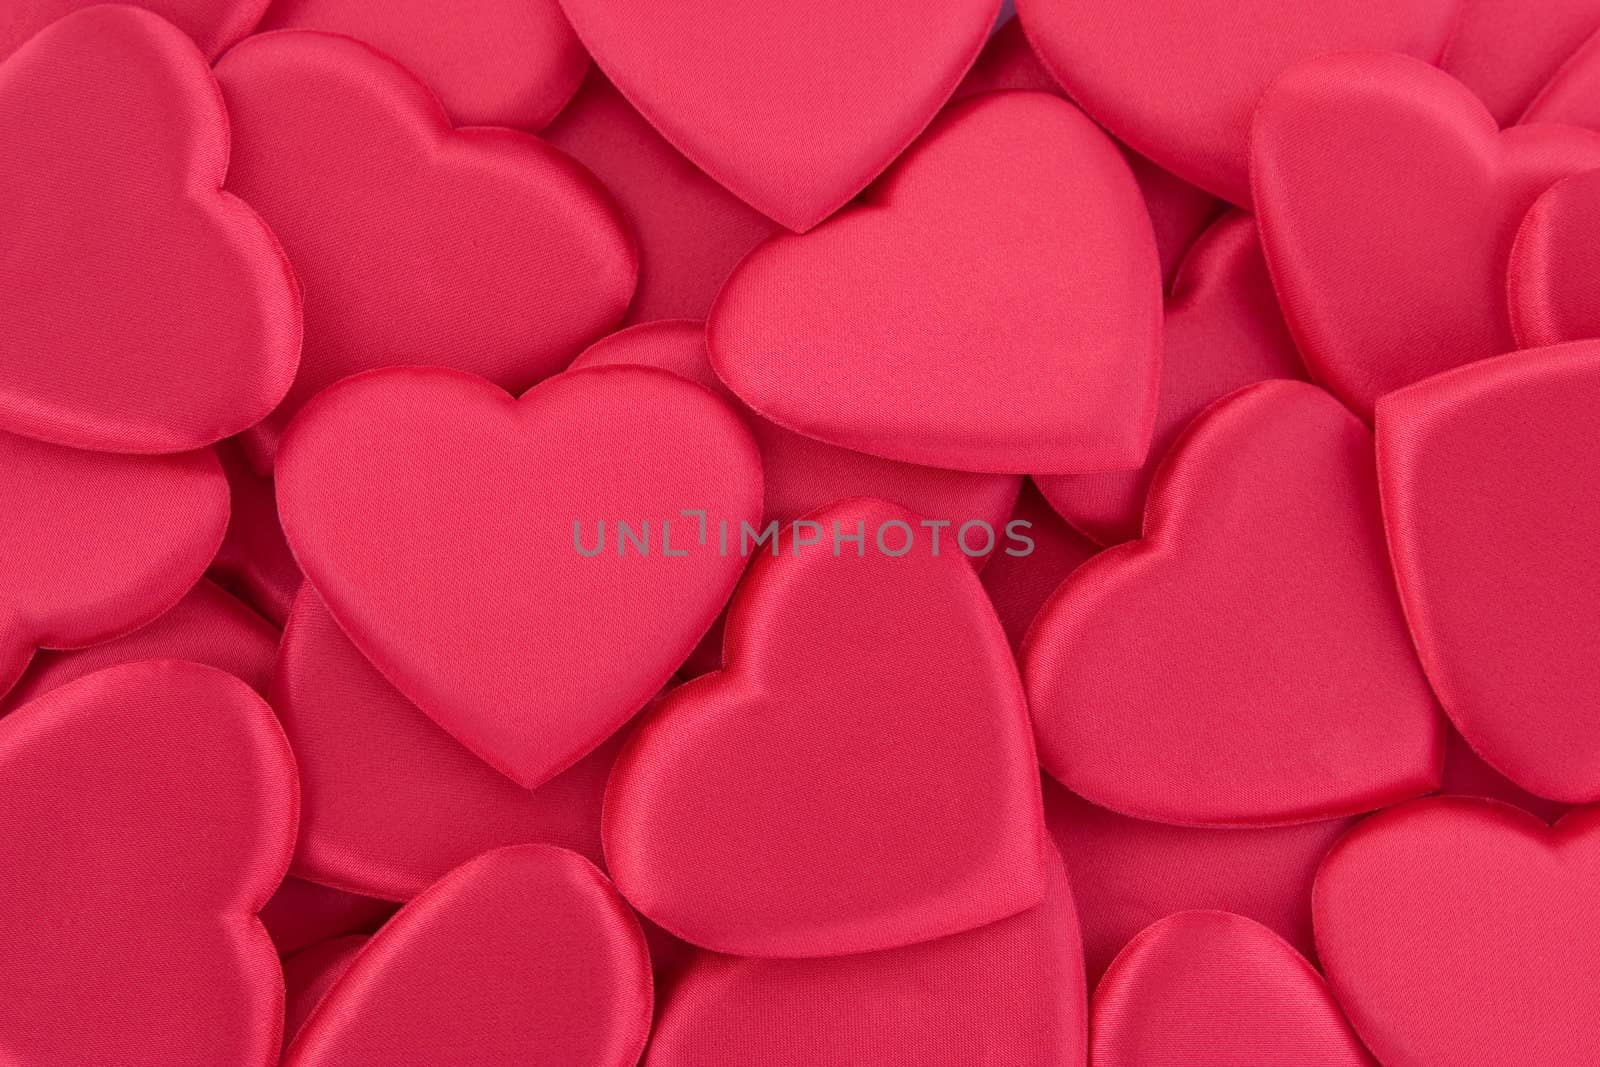 Heart shapes background for Valentine's Day themes